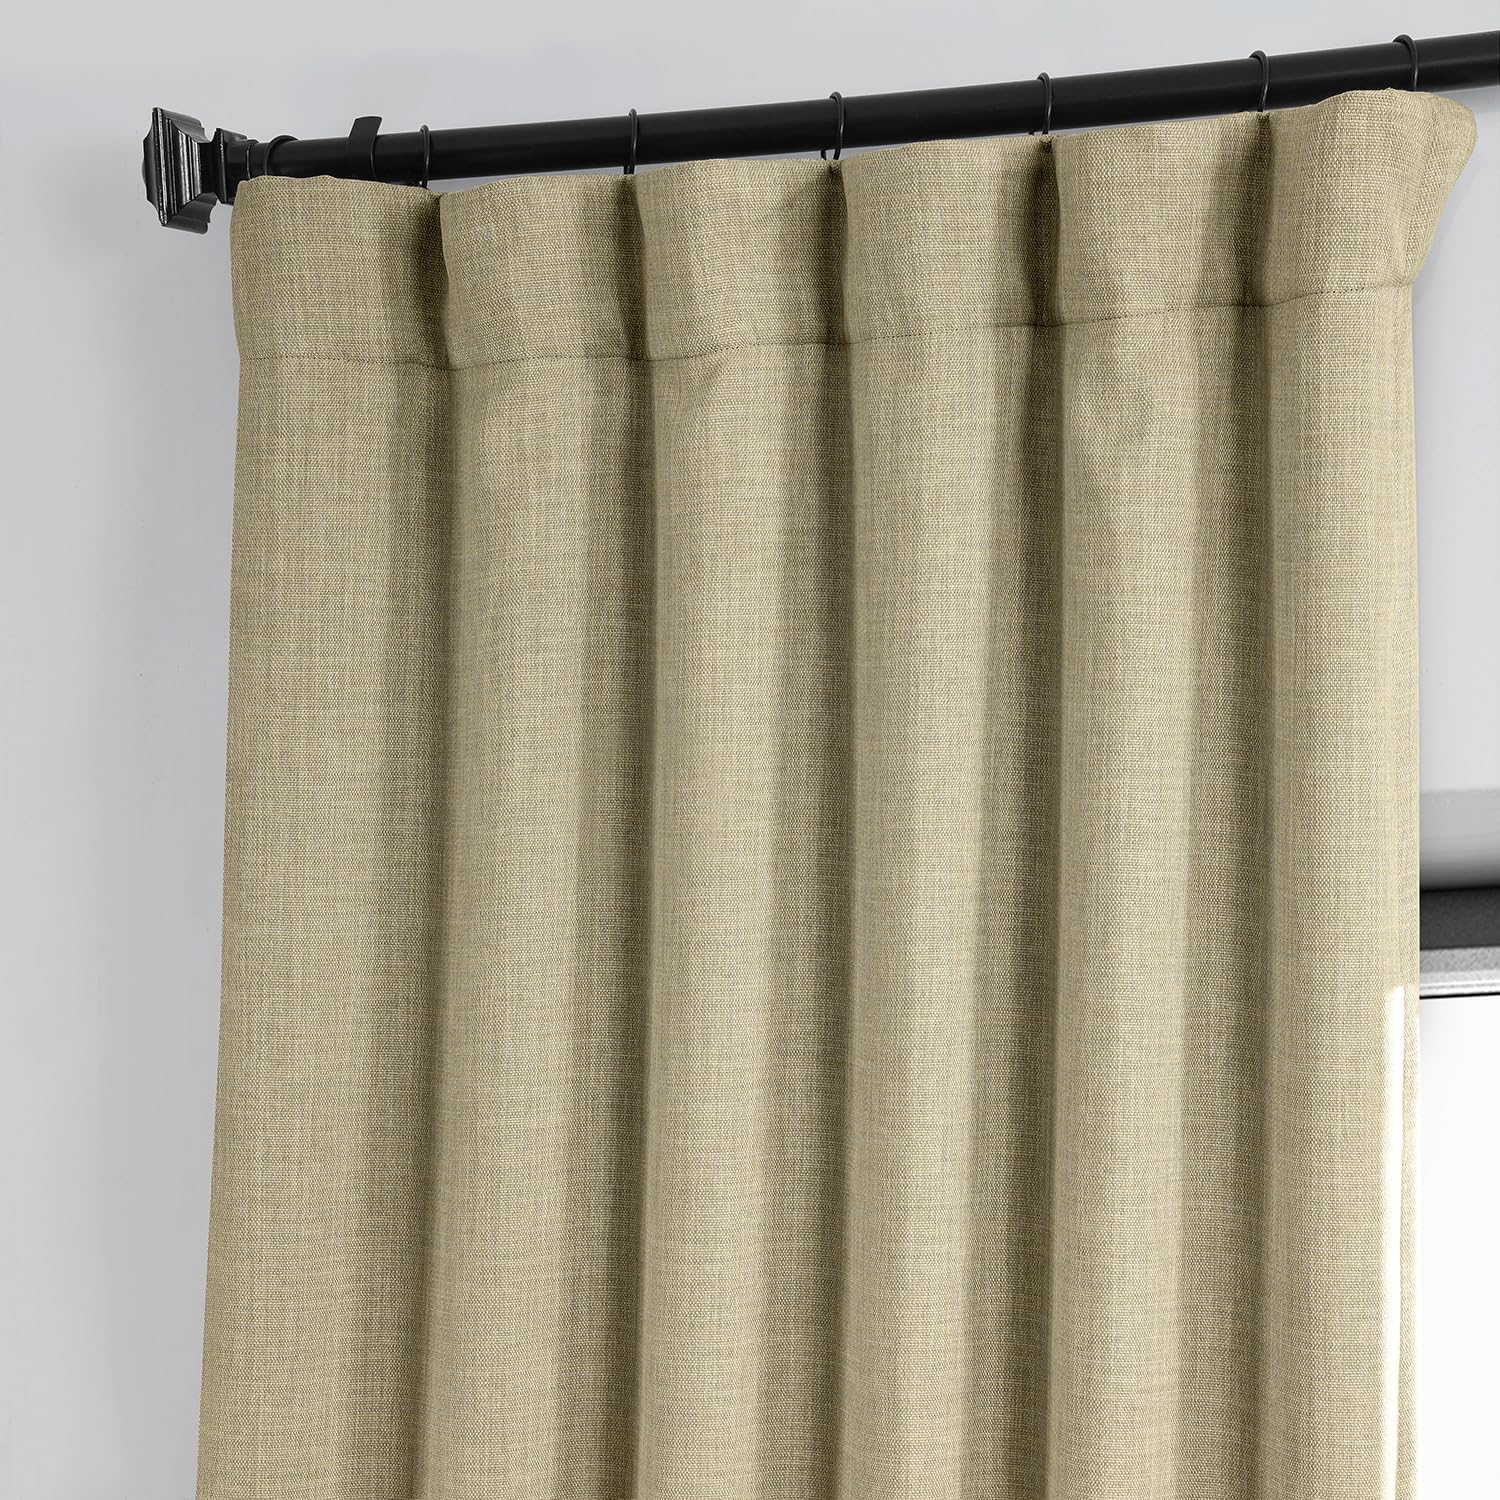 HPD Half Price Drapes Faux Linen Room Darkening Curtains - 96 Inches Long Luxury Linen Curtains for Bedroom & Living Room (1 Panel), 50W X 96L, Thatched Tan